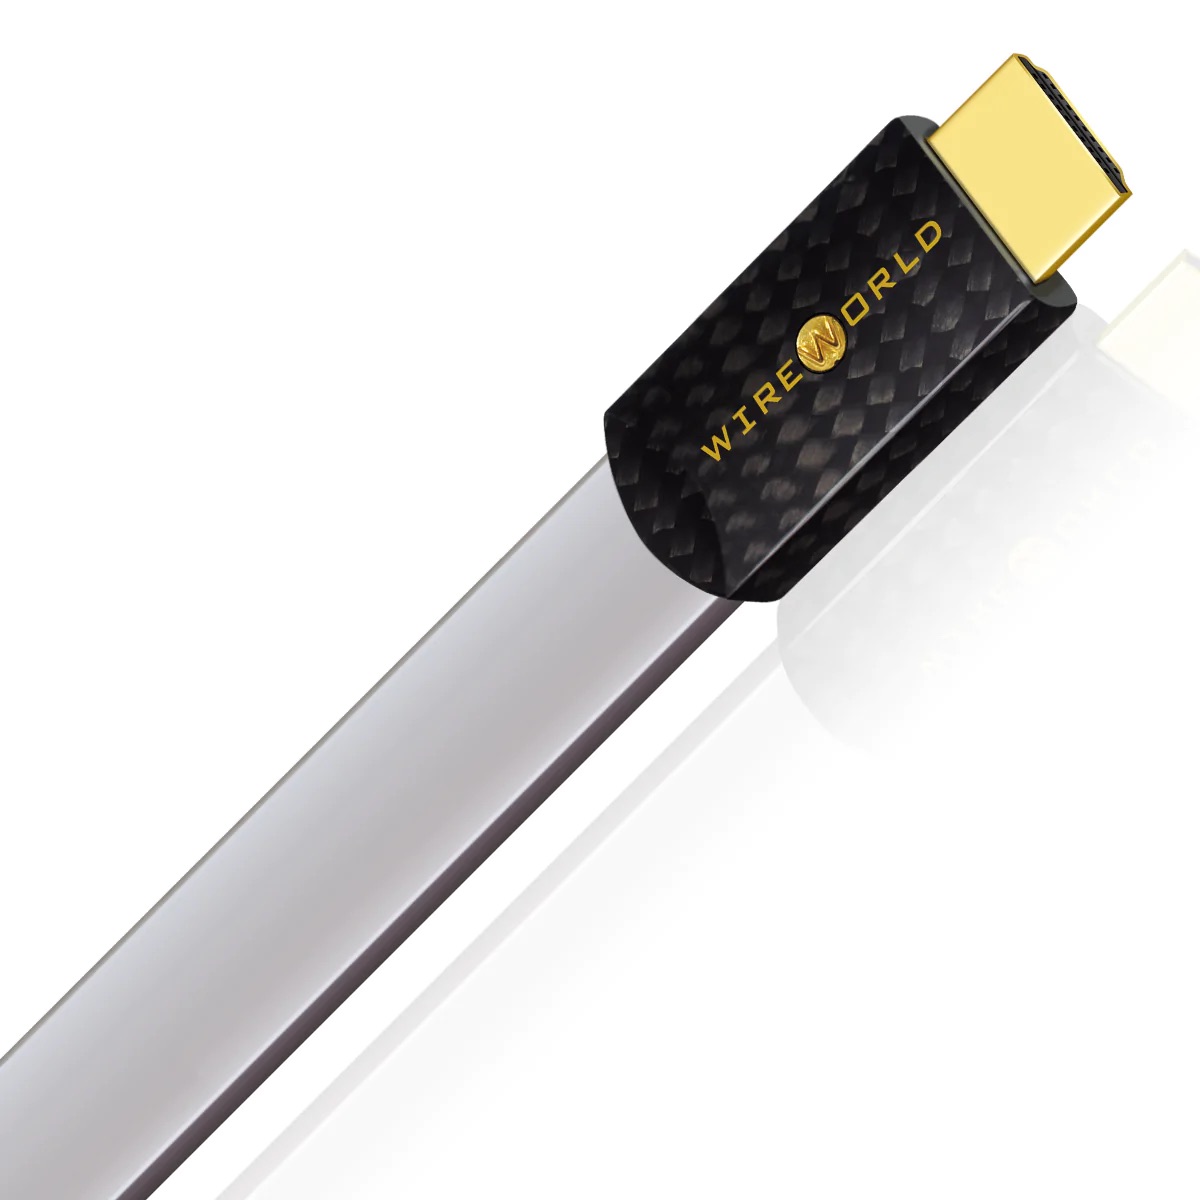 Announcing the Stellar 48 Optical HDMI with VIVIDTECH